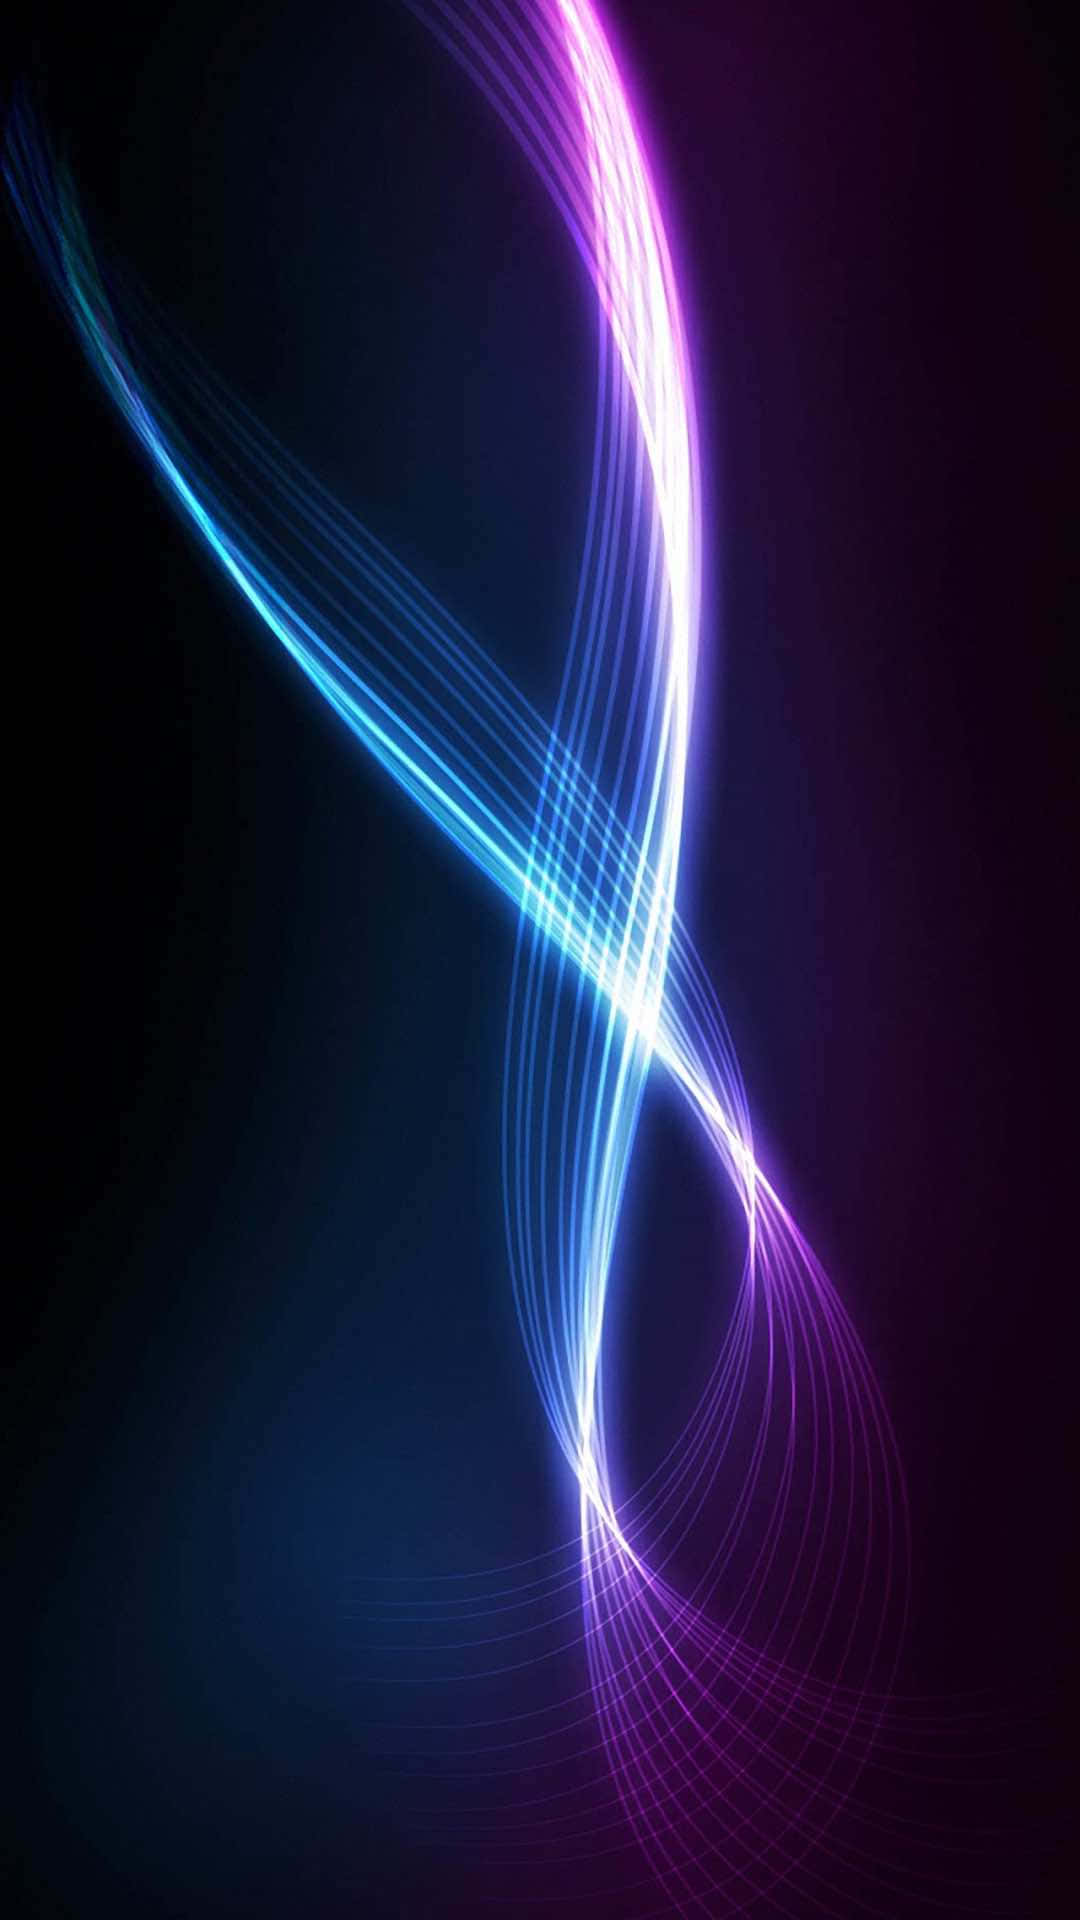 A Purple And Blue Light Wave On A Black Background